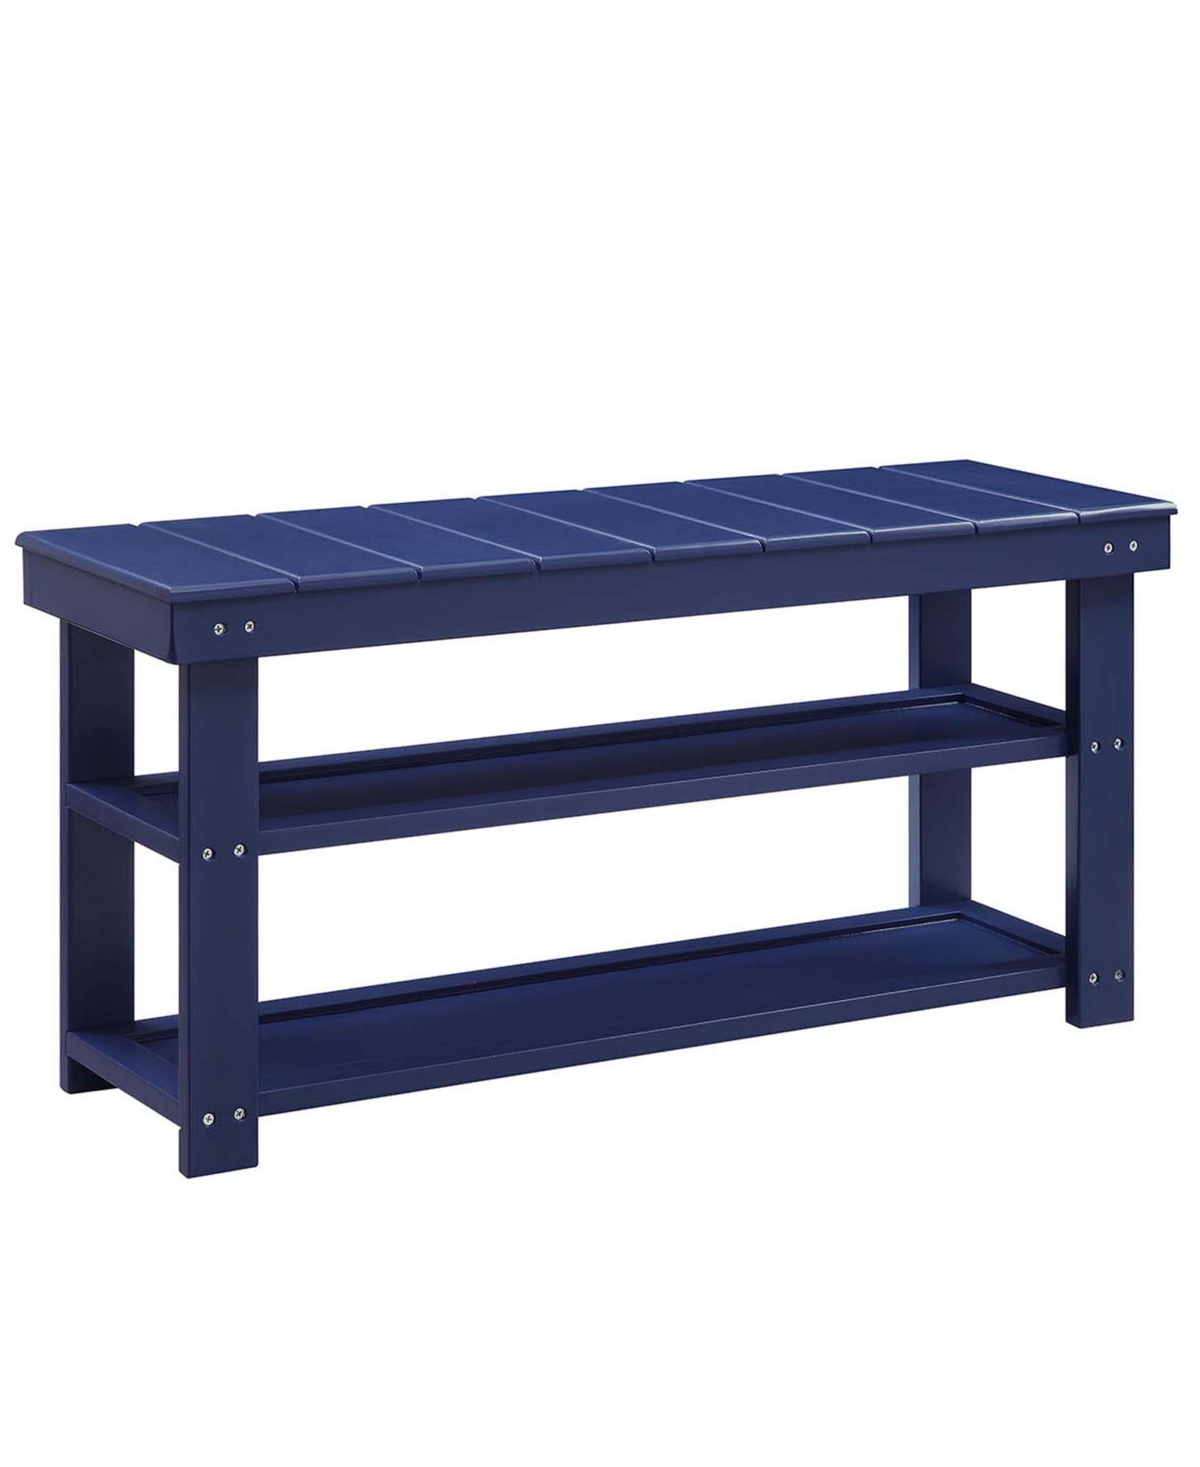 Convenience Concepts 35.5" Mdf Oxford Utility Mudroom Bench With Shelves In Cobalt Blue